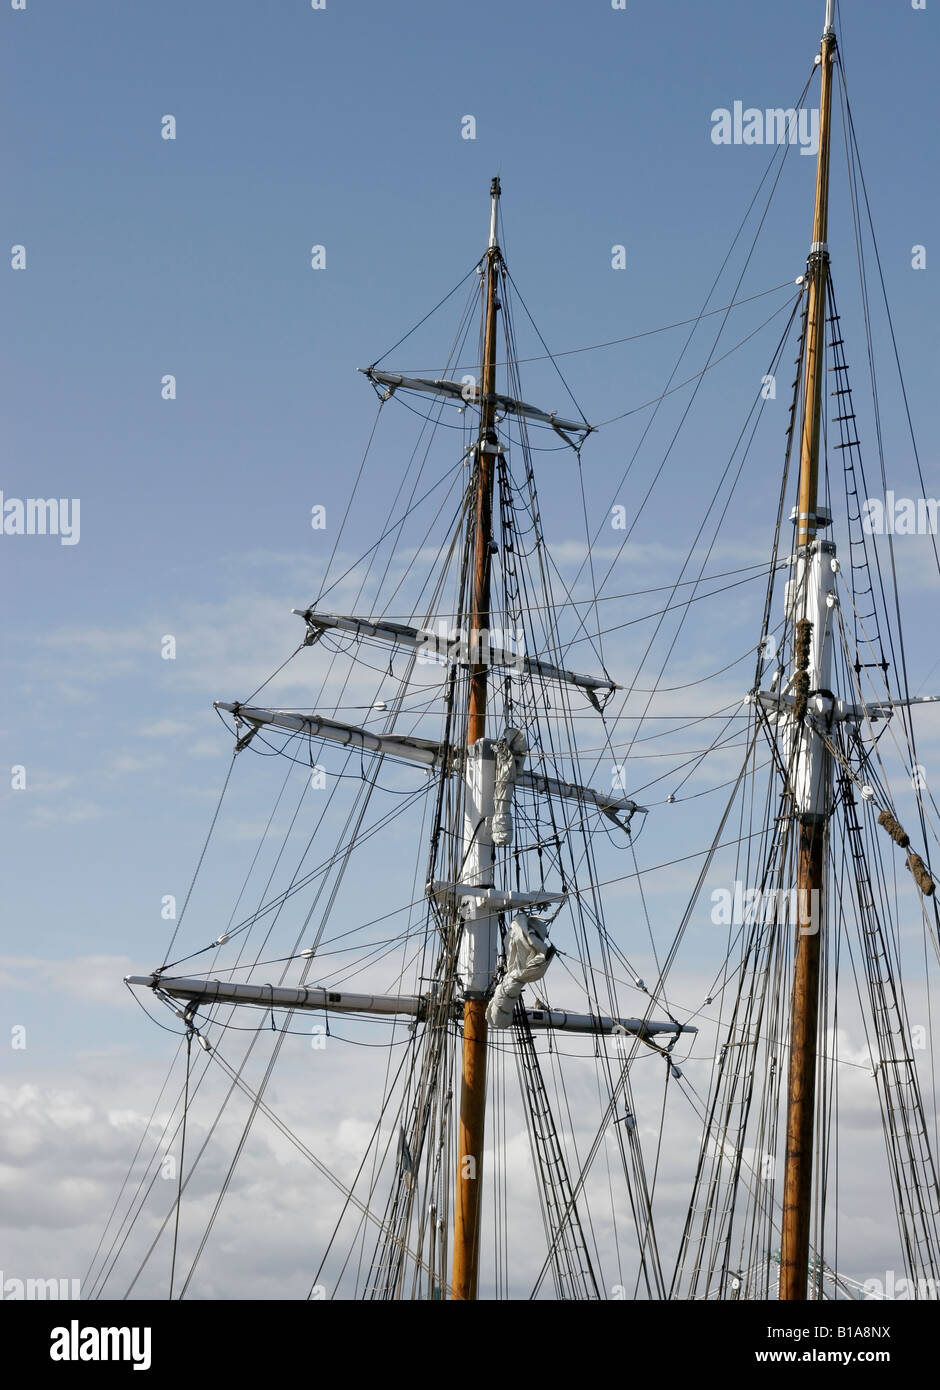 Mast rigging on an old sail boat Stock Photo